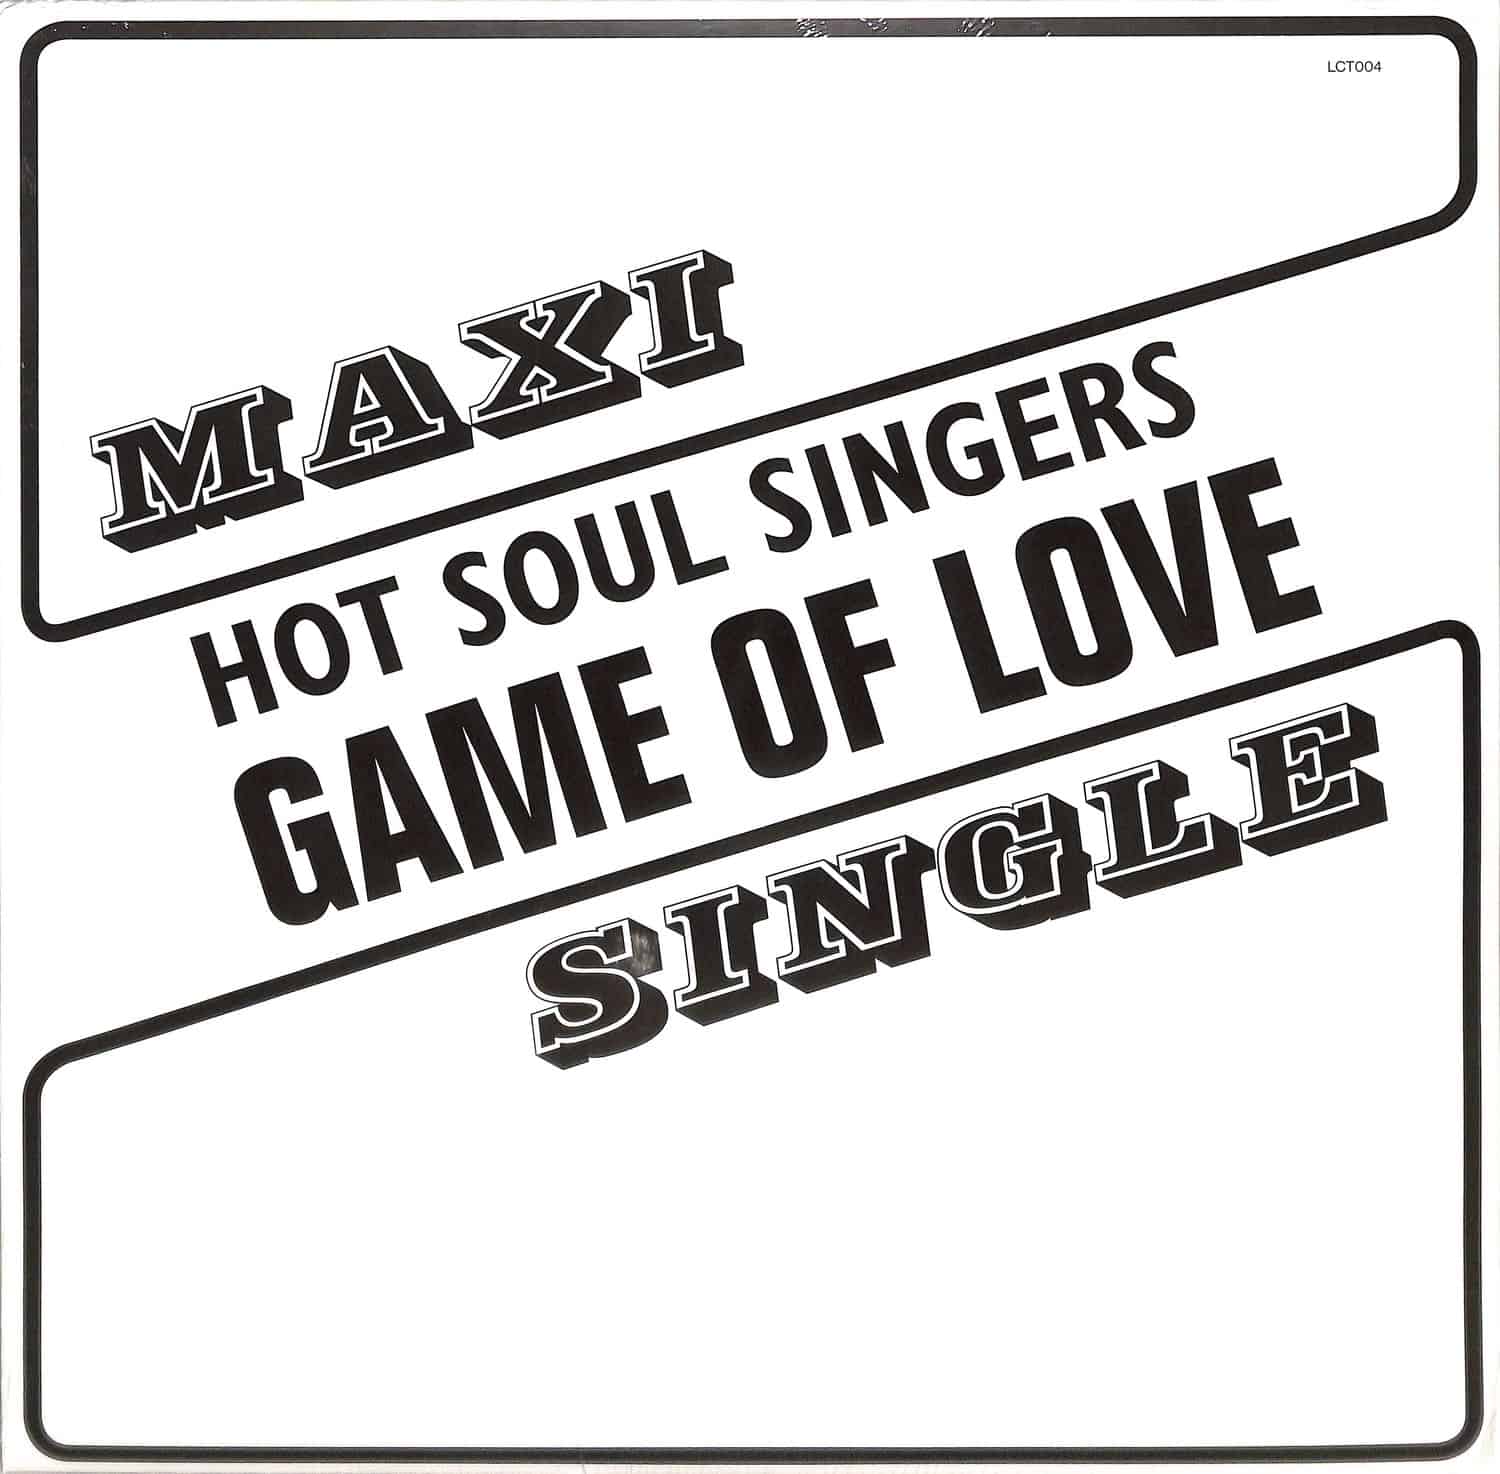 Hot Soul Singers - GAME OF LOVE